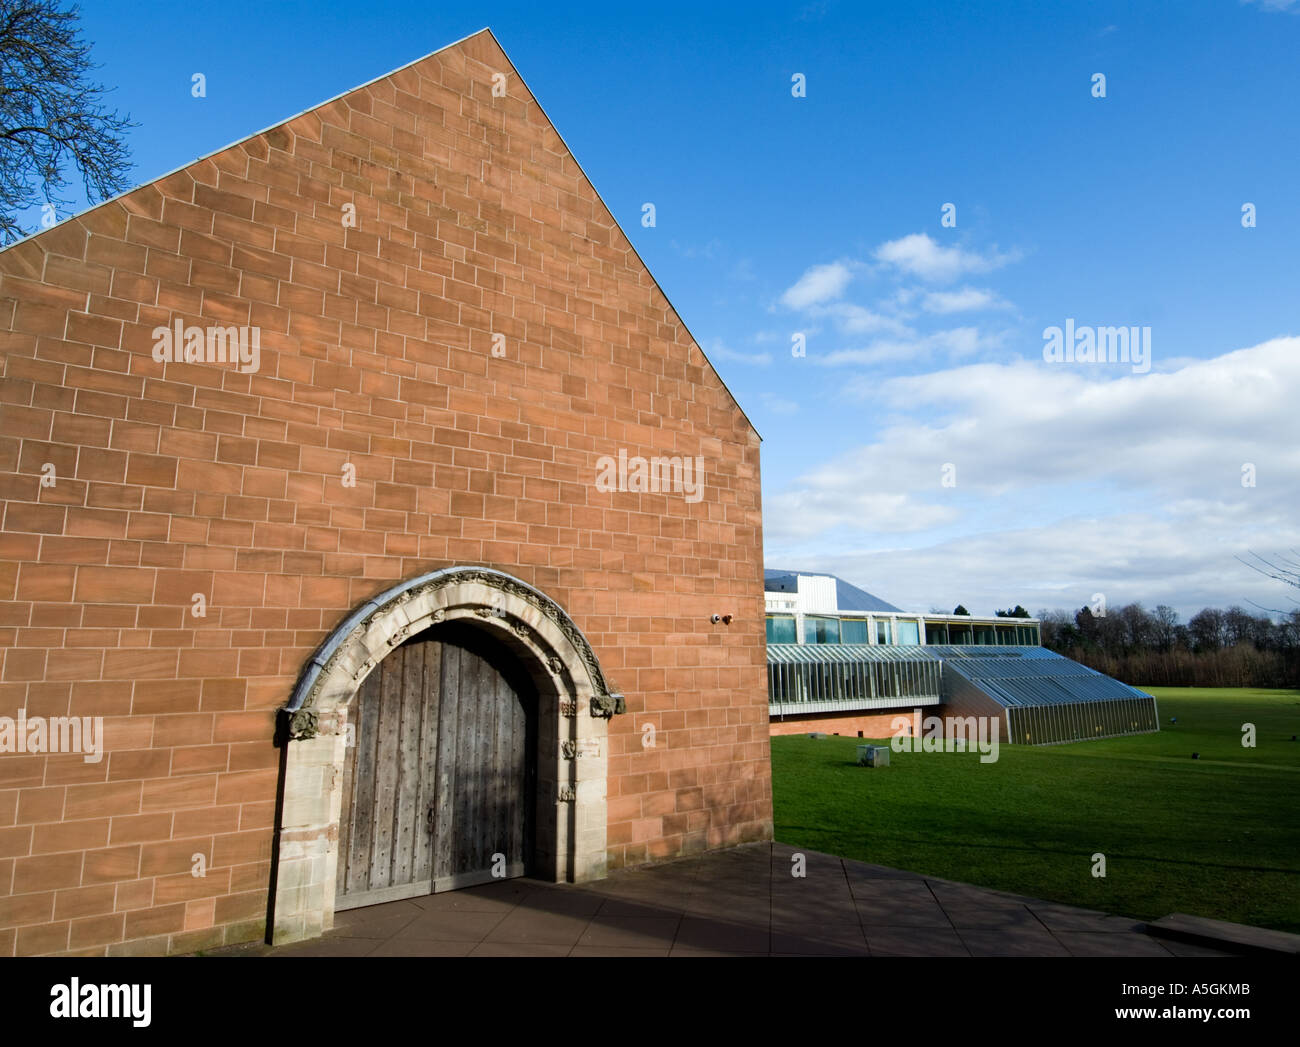 Exterior view of entrance to Burrell Museum in Pollok Park Glasgow UK Stock Photo